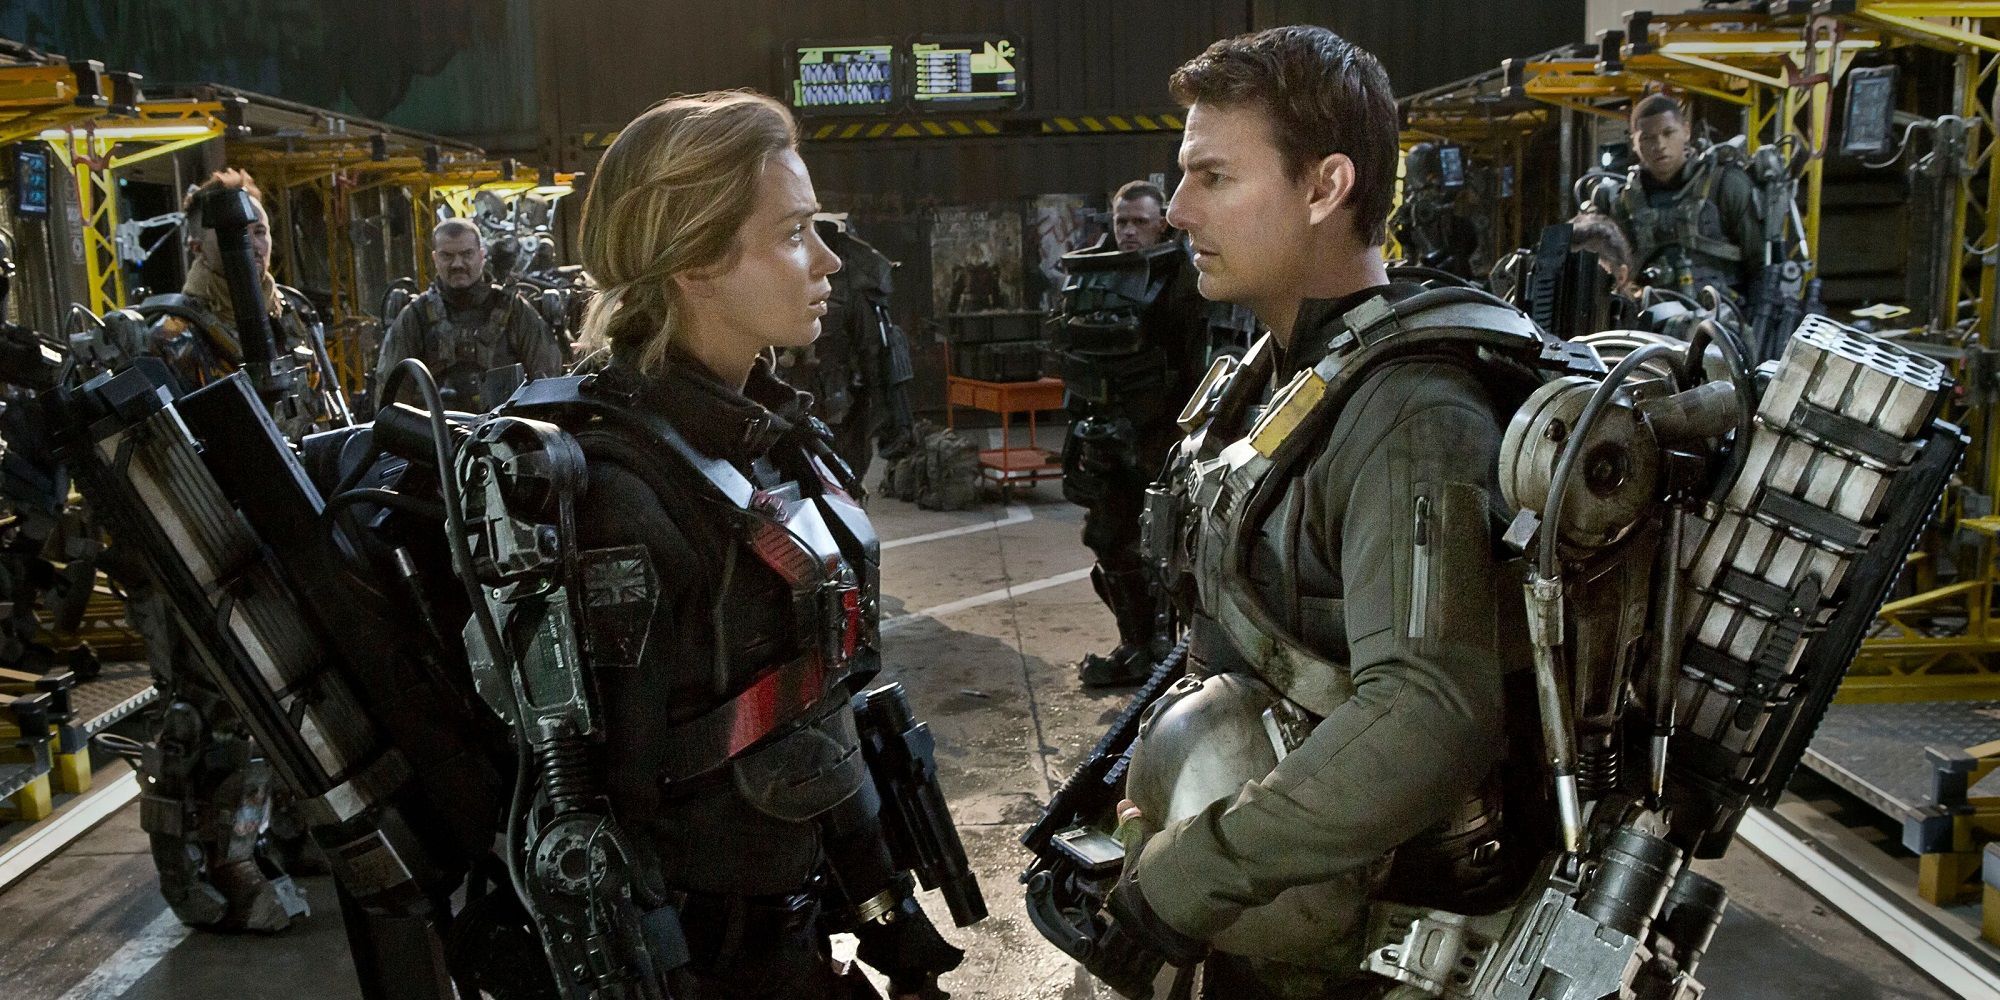 Rita and Ron face each other on Edge of Tomorrow